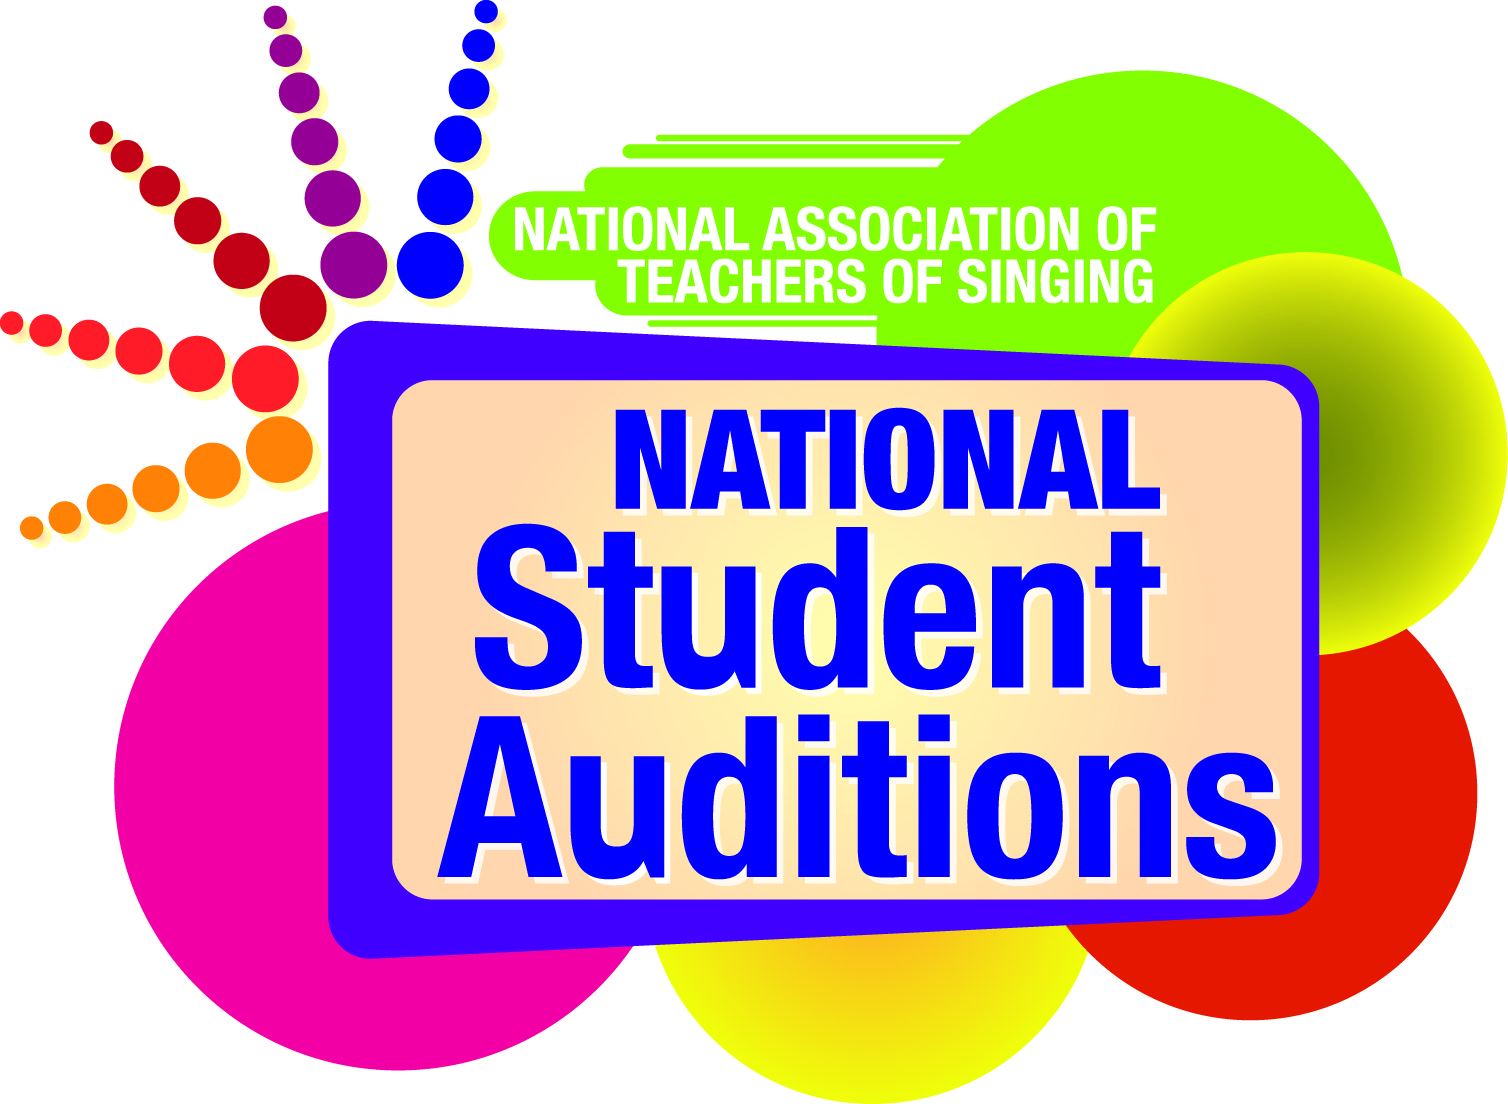 NATS National Student Auditions